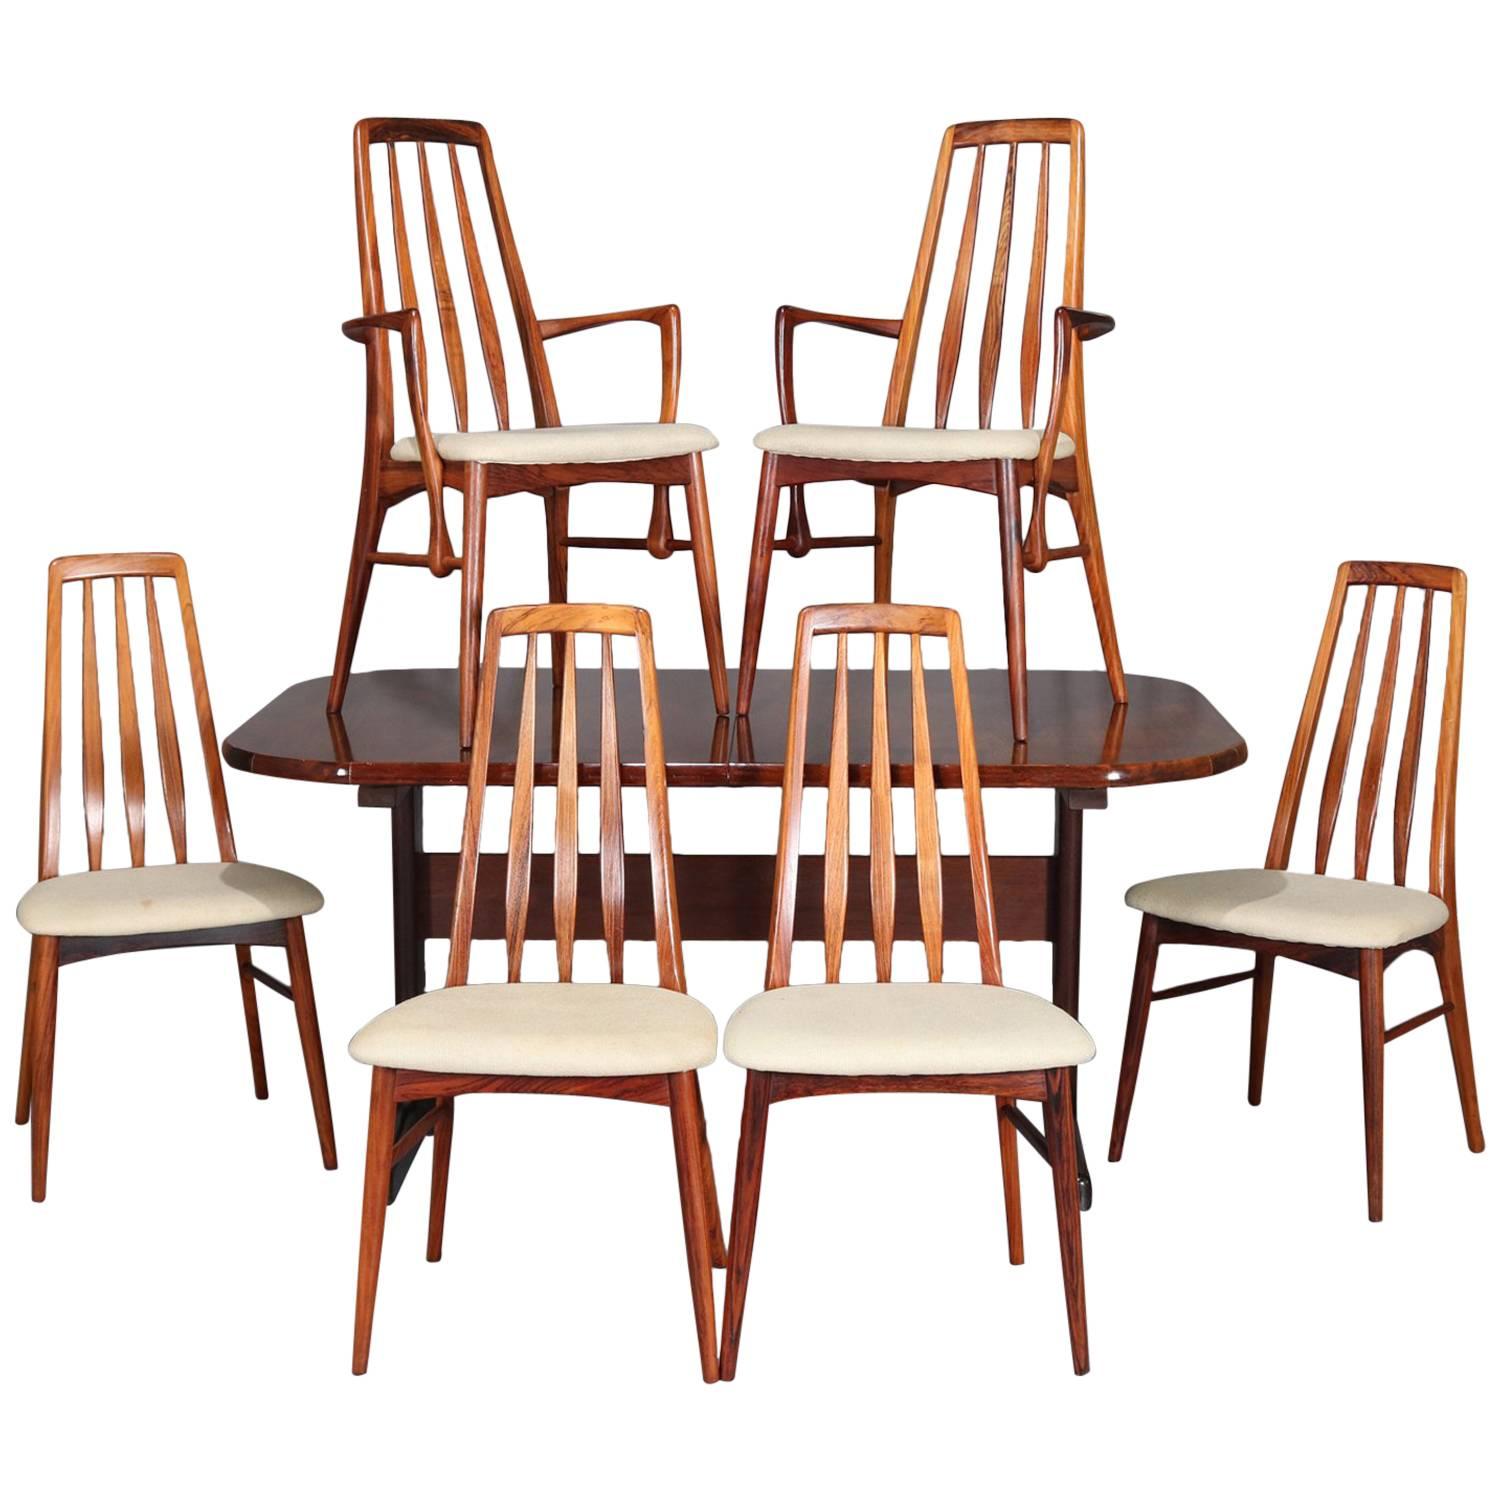 Midcentury Danish Modern Sculpted Rosewood Dining Table & Six Chairs, circa 1960